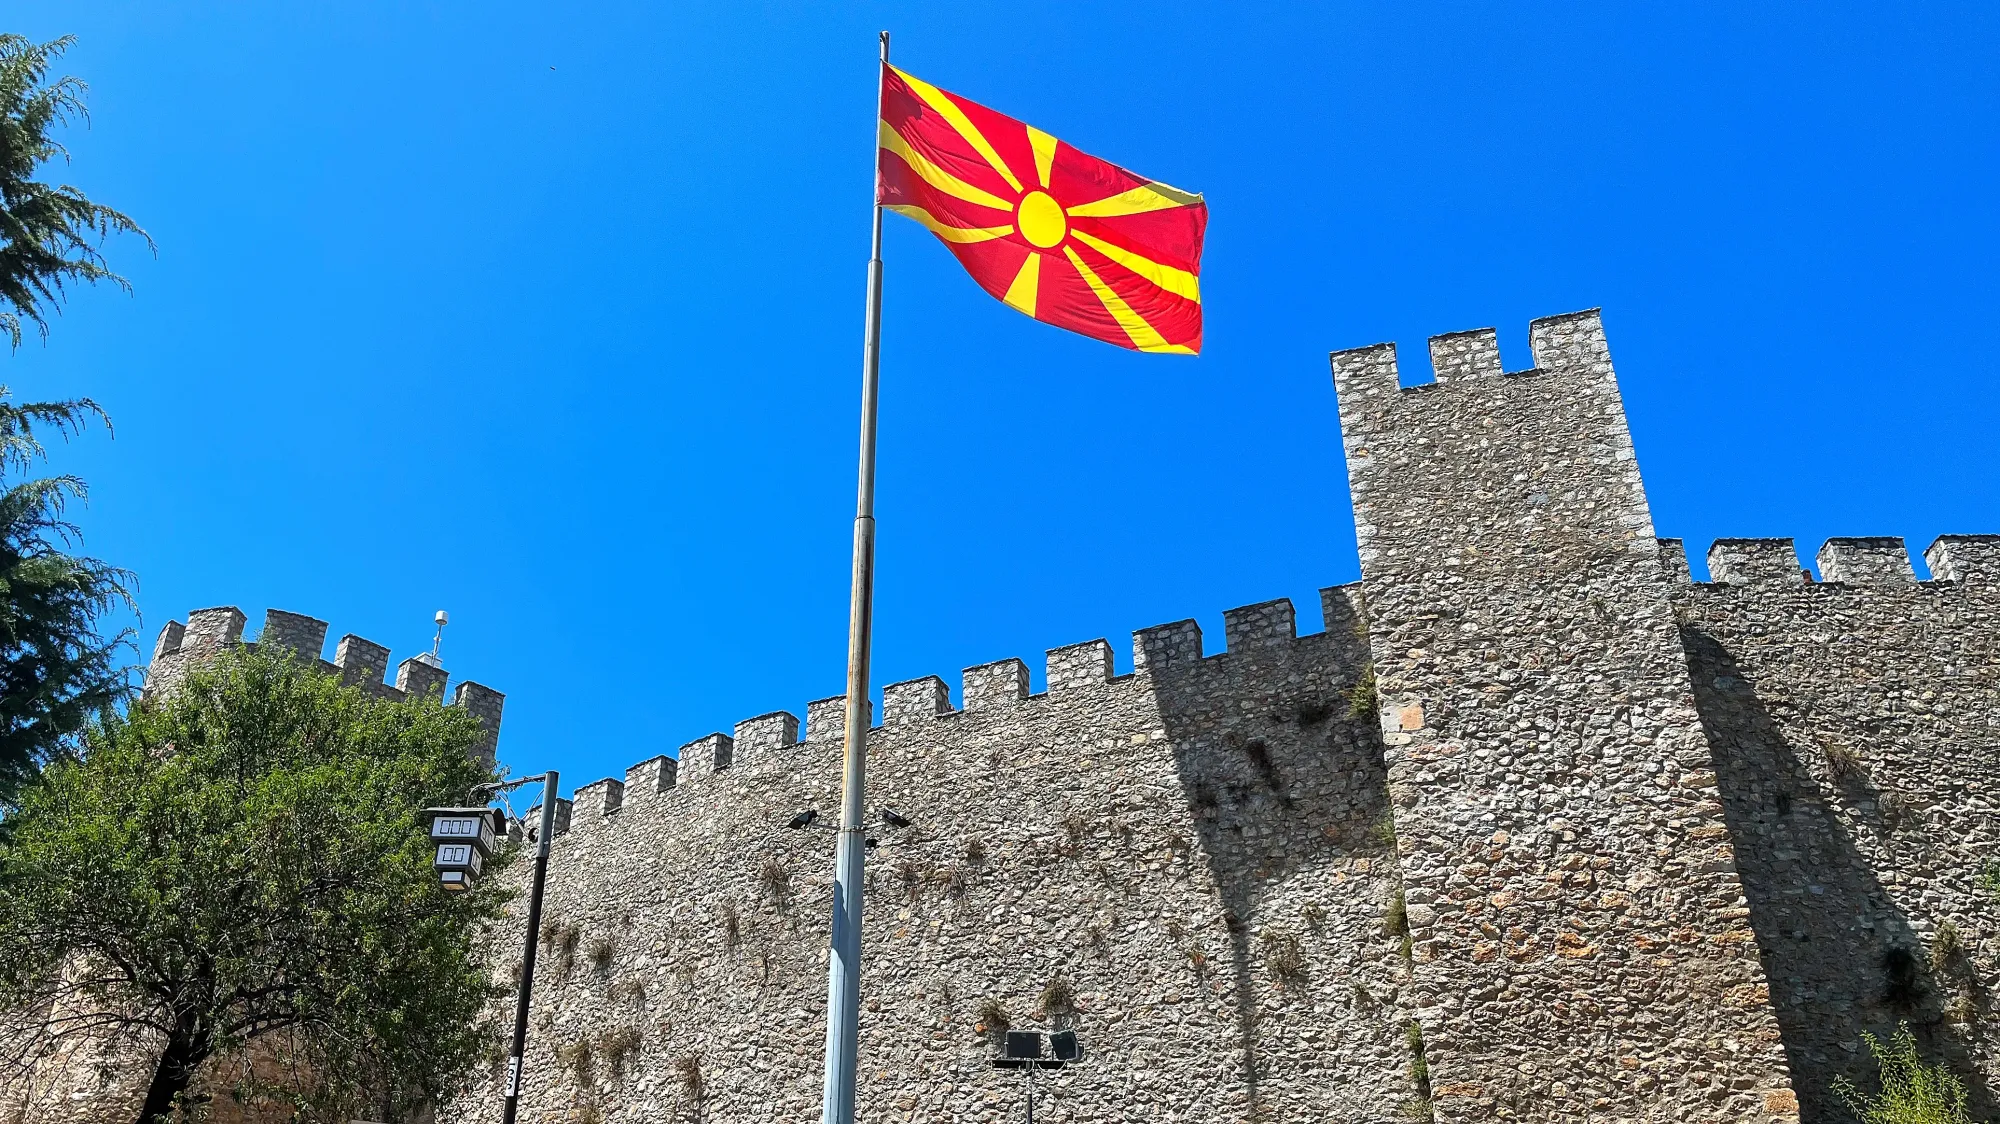 Stone ramparts with the North Macedonian flag flying overhead